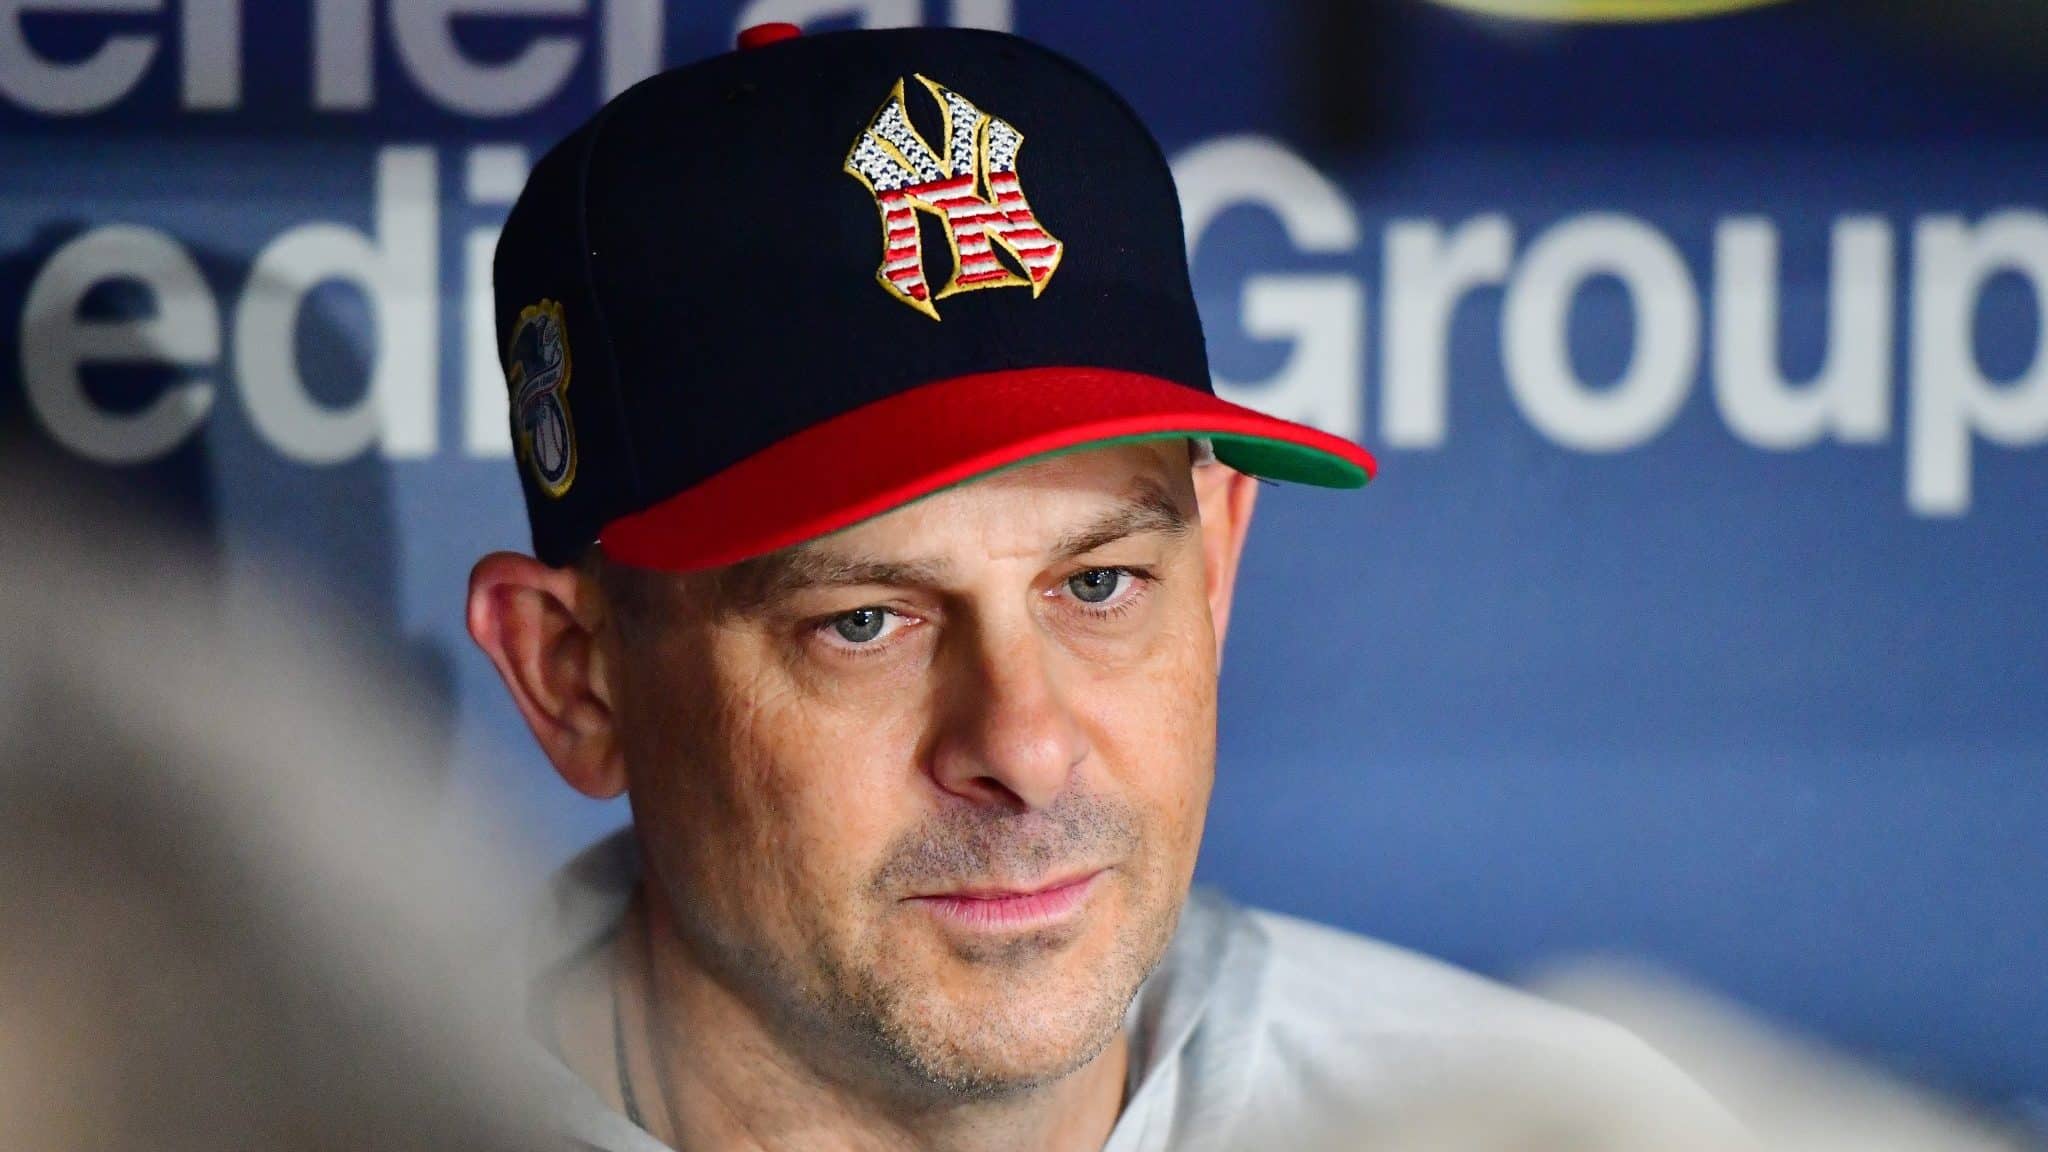 ST. PETERSBURG, FLORIDA - JULY 04: Manager Aaron Boone #17 of the New York Yankees answers questions from reporters before a baseball game against the Tampa Bay Rays at Tropicana Field on July 04, 2019 in St. Petersburg, Florida.